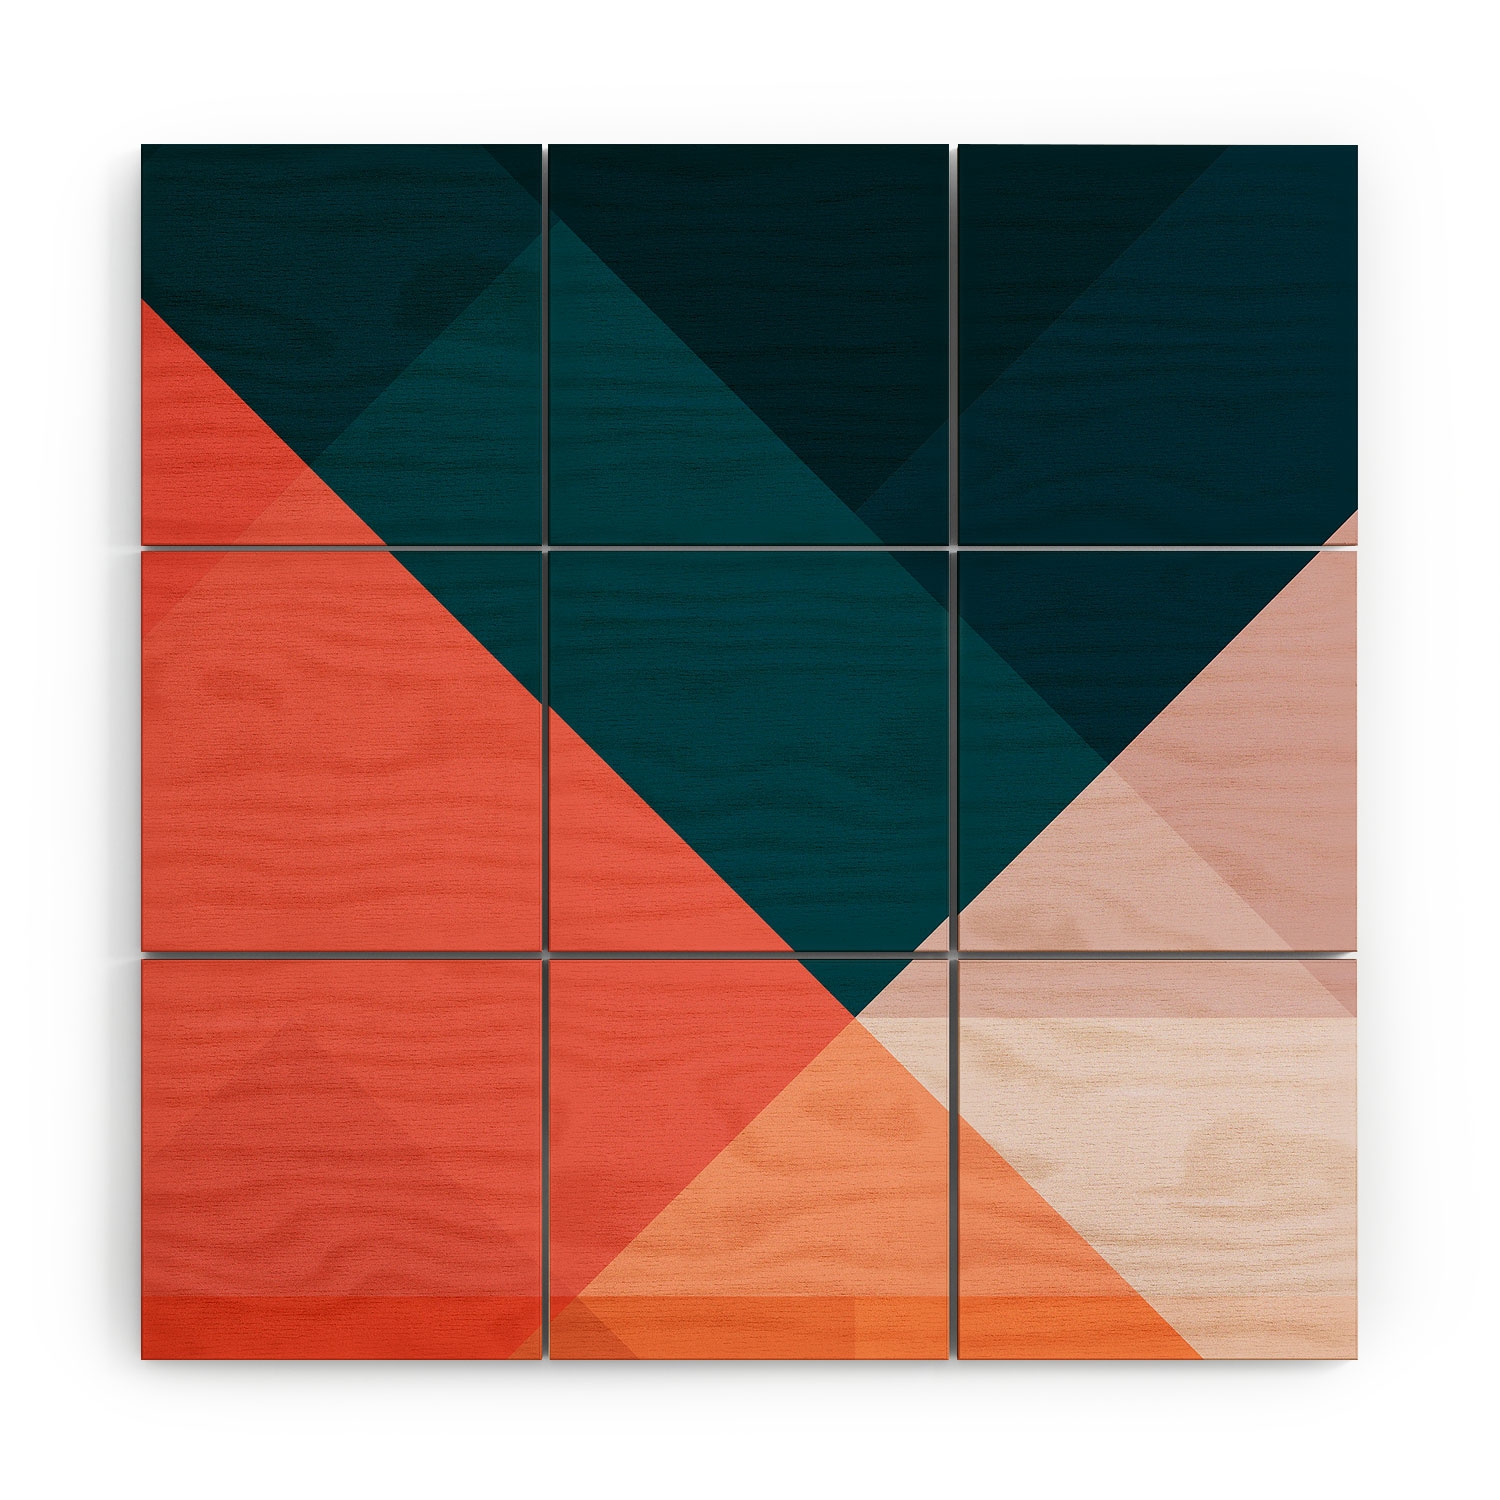 Geometric 1708 by The Old Art Studio - Wood Wall Mural5' x 5' (Nine 20" wood Squares) - Image 3